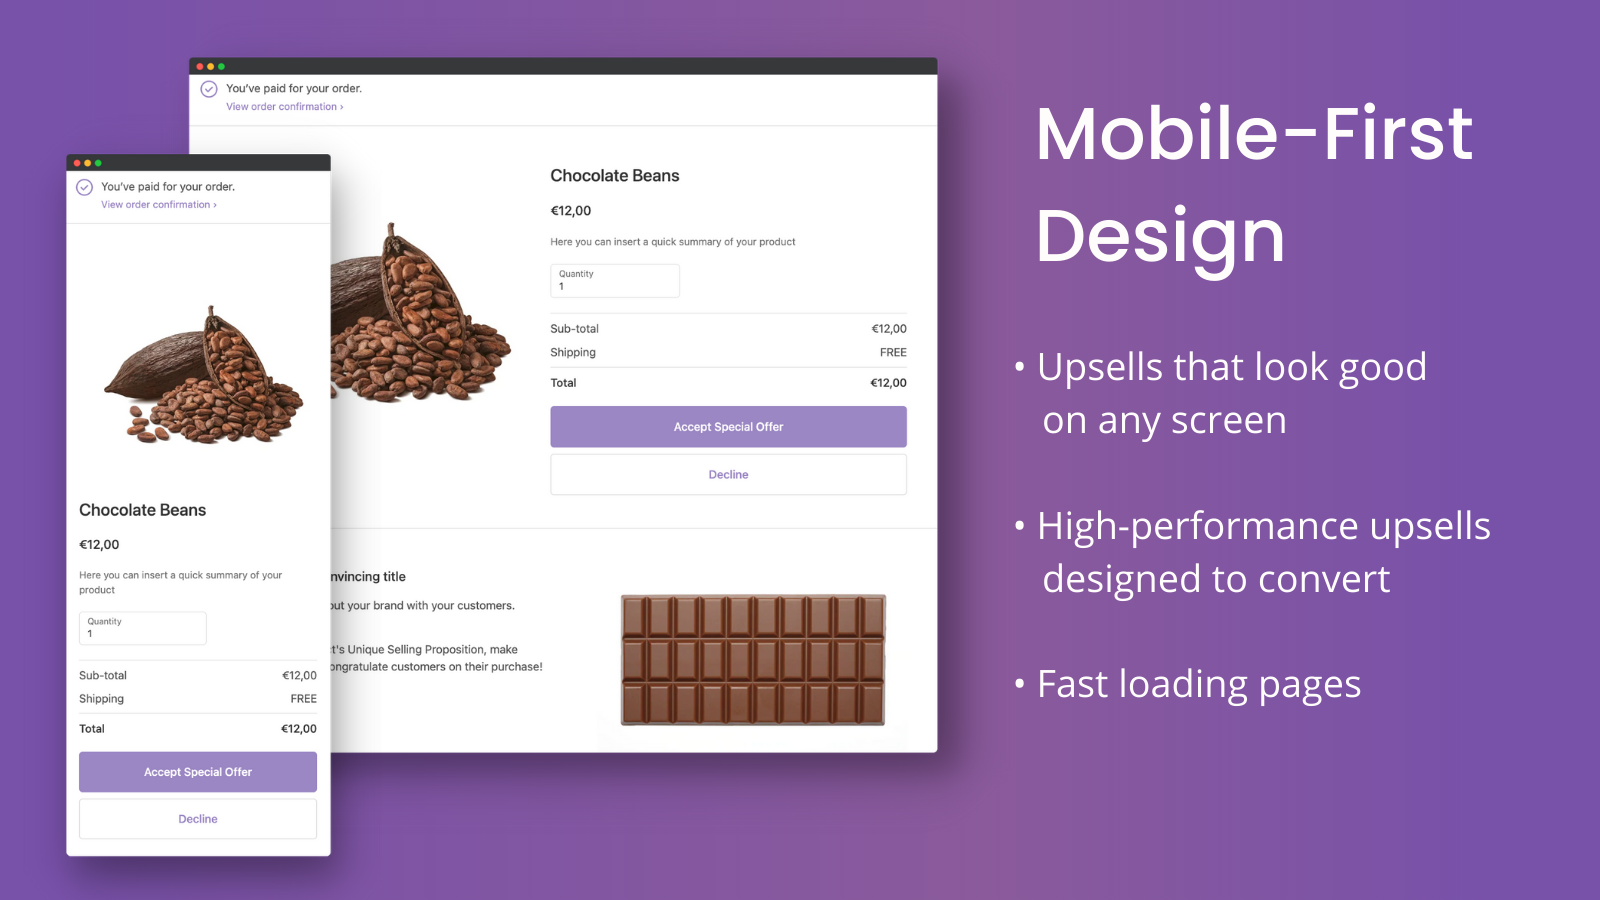 mobile-first design - offers that look good on mobile & desktop